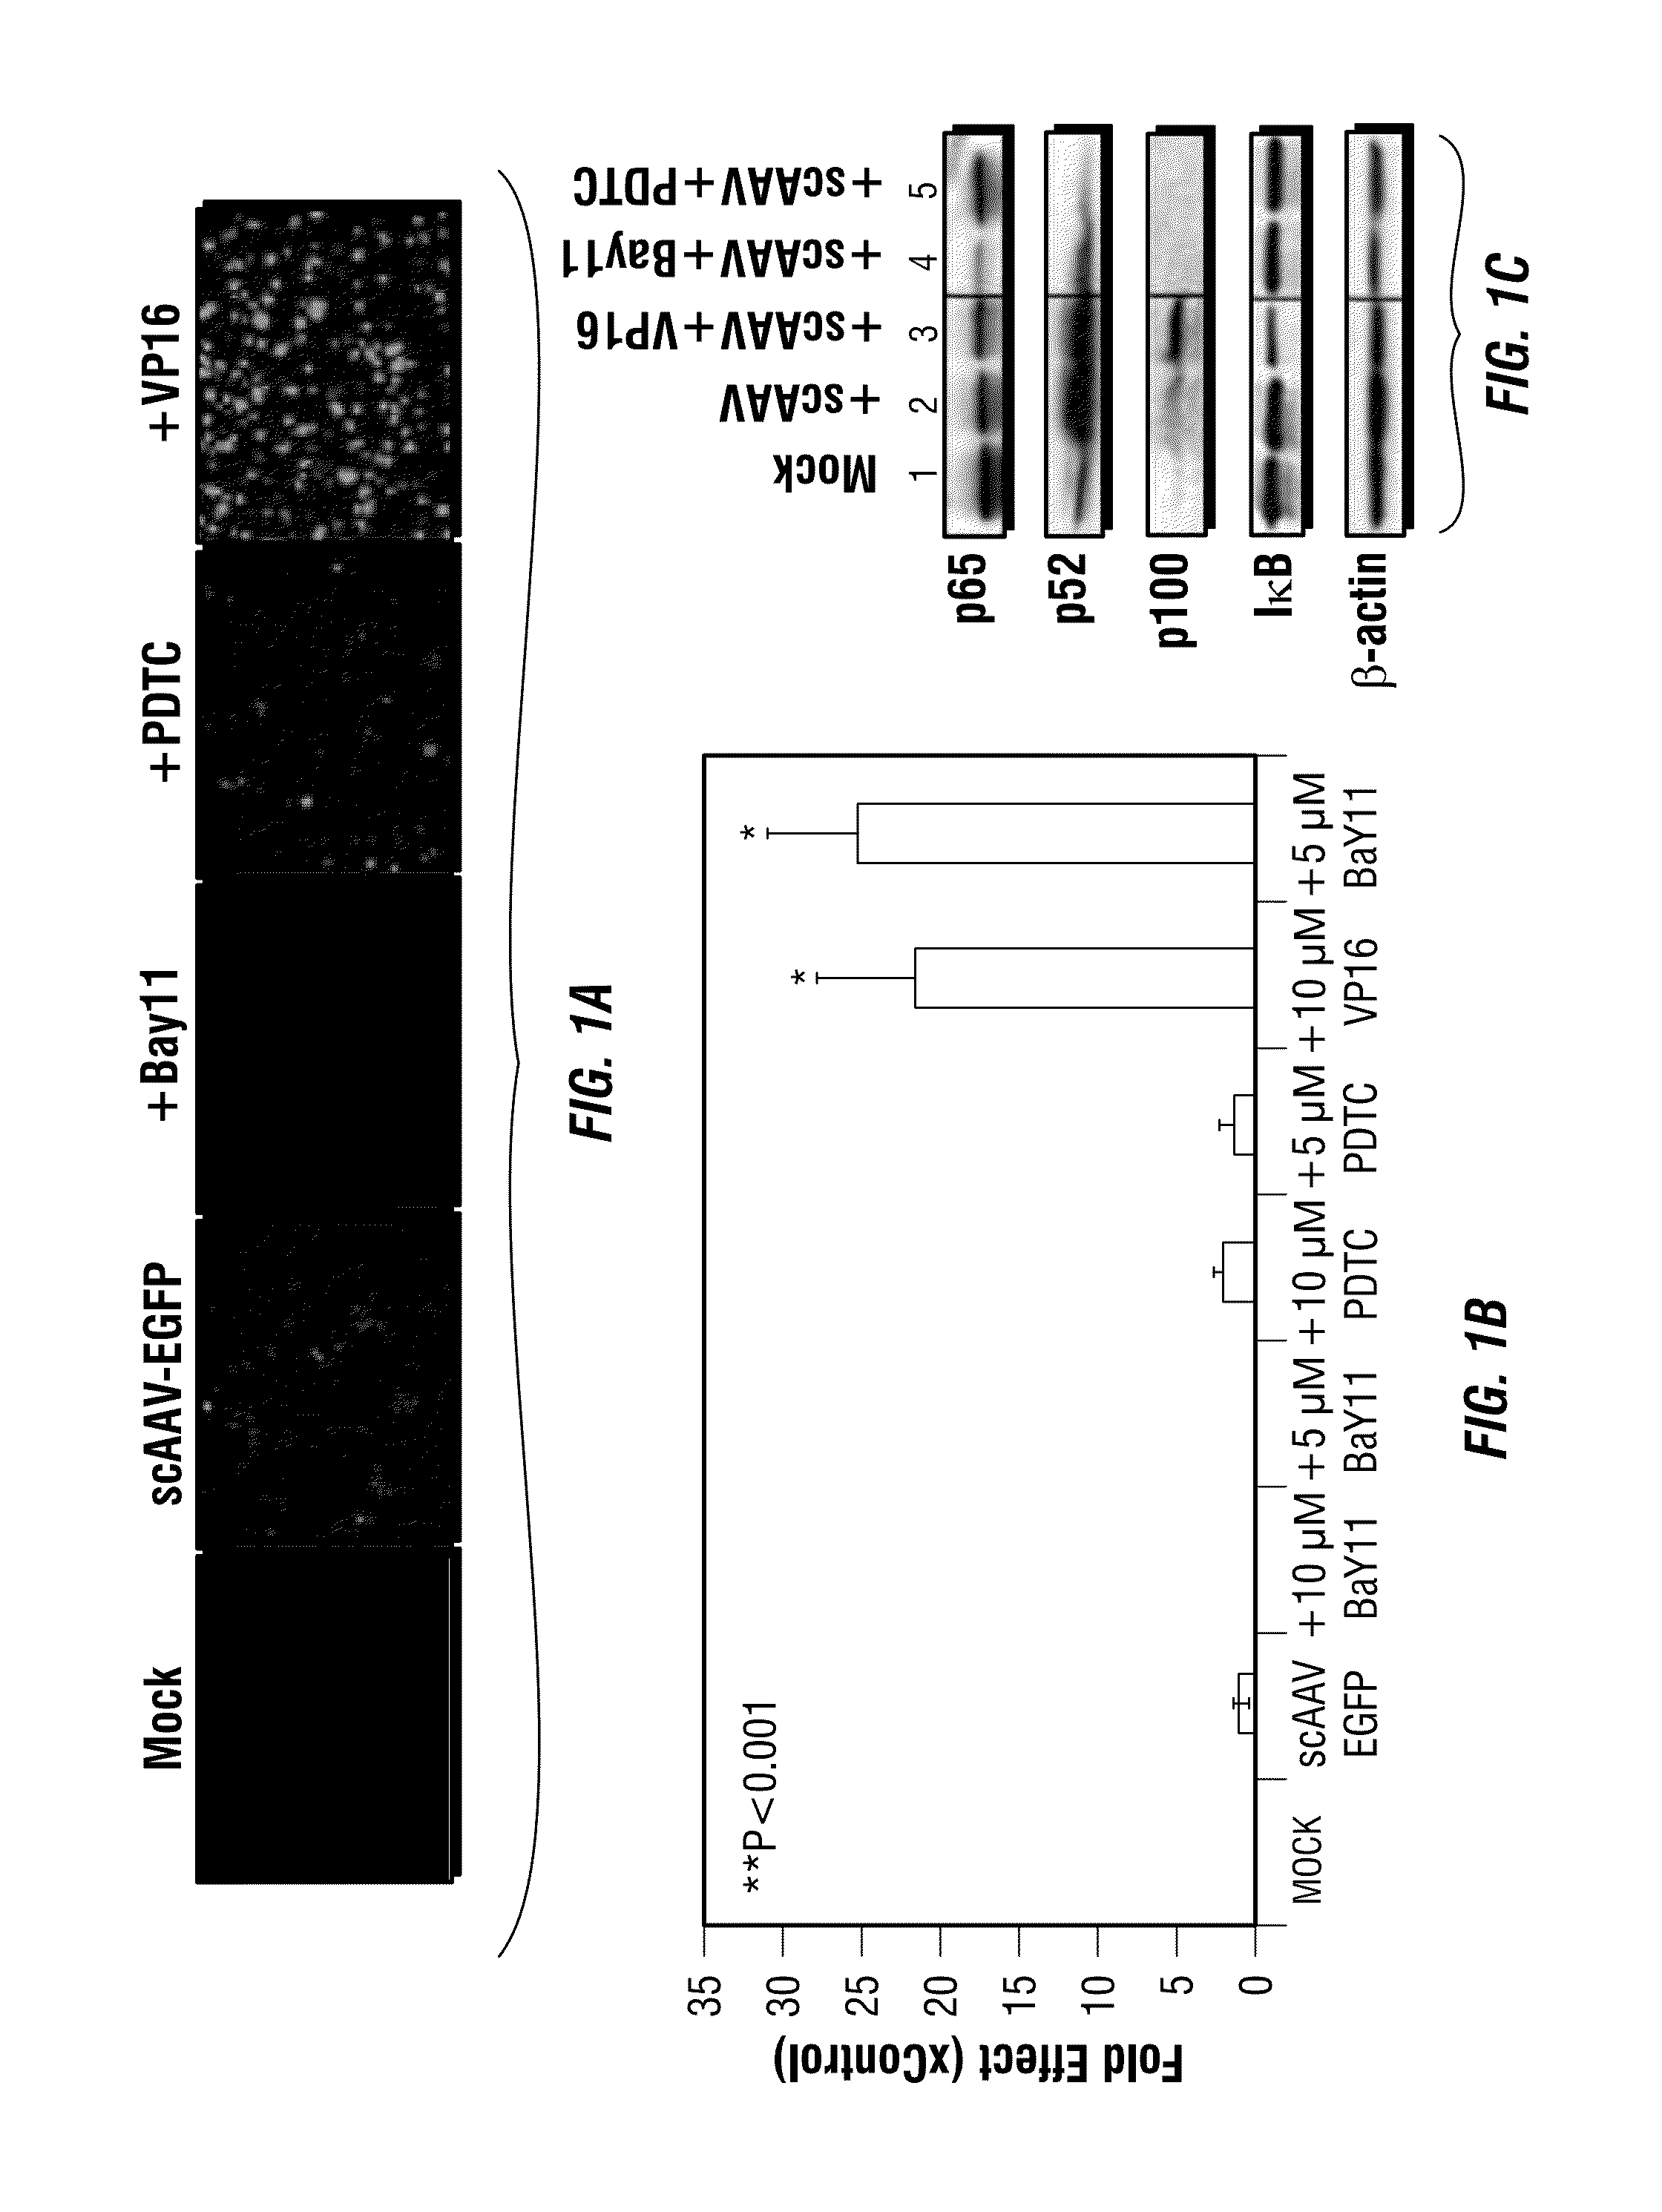 CAPSID-MODIFIED rAAV VECTOR COMPOSITIONS HAVING IMPROVED TRANSDUCTION EFFICIENCIES, AND METHODS OF USE